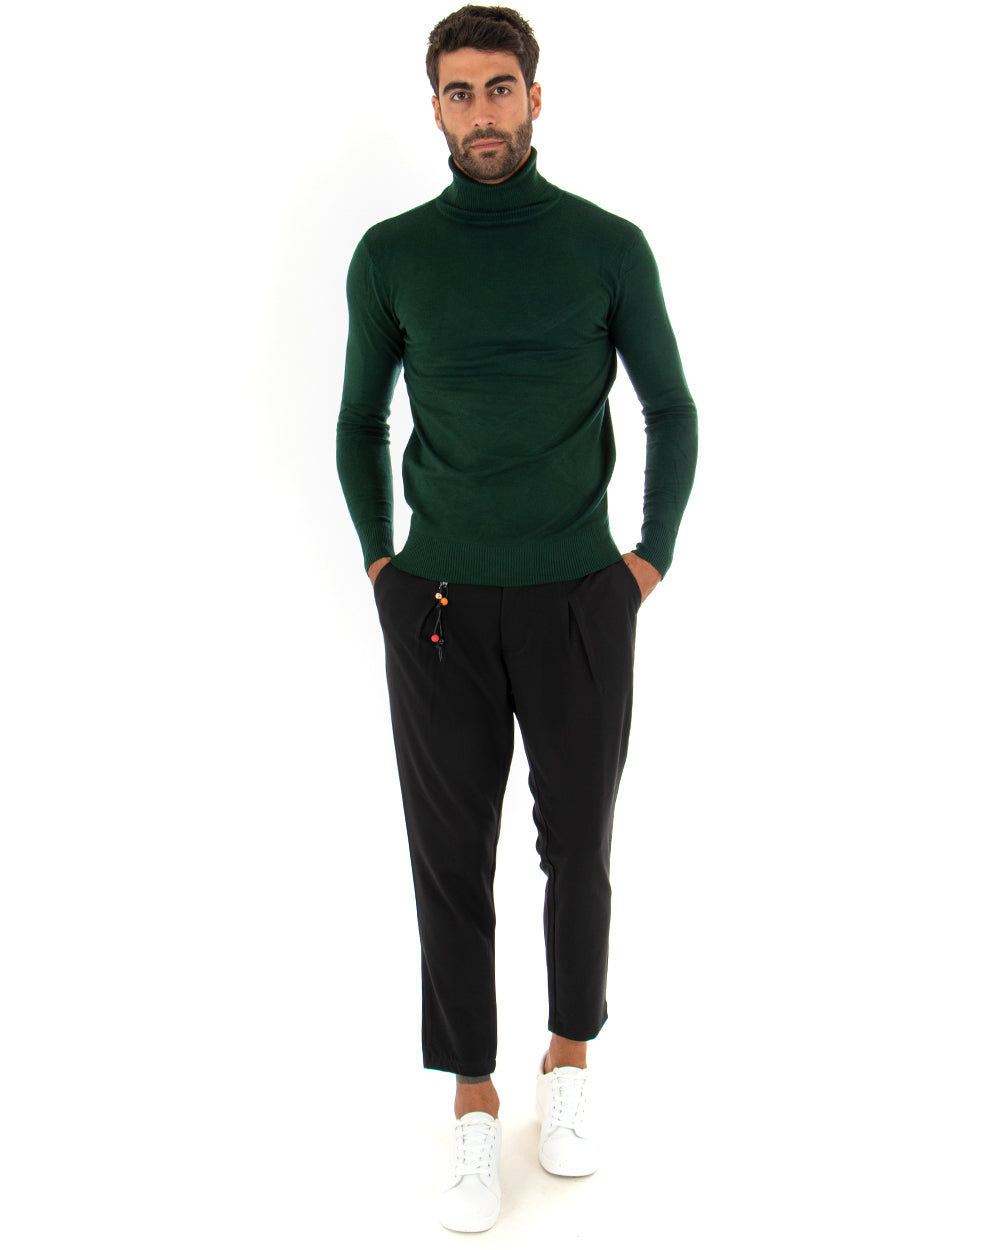 Men's Sweater Long Sleeves Elastic High Neck Solid Color Bottle Green GIOSAL M2548A